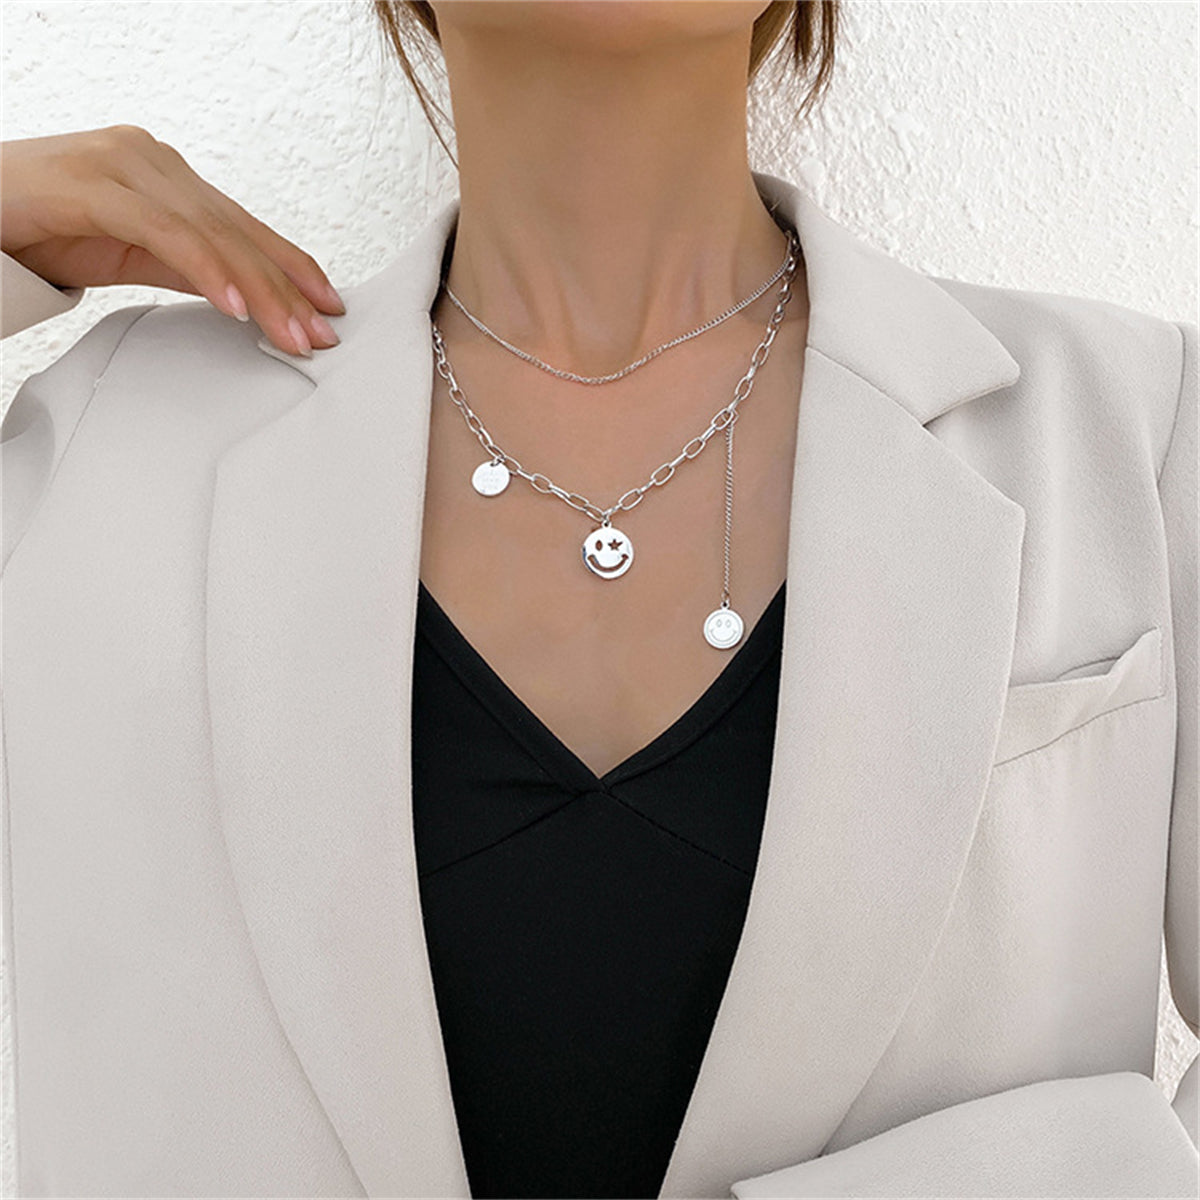 Silver-Plated 'I Love You' Smiley Drop Layered Necklace